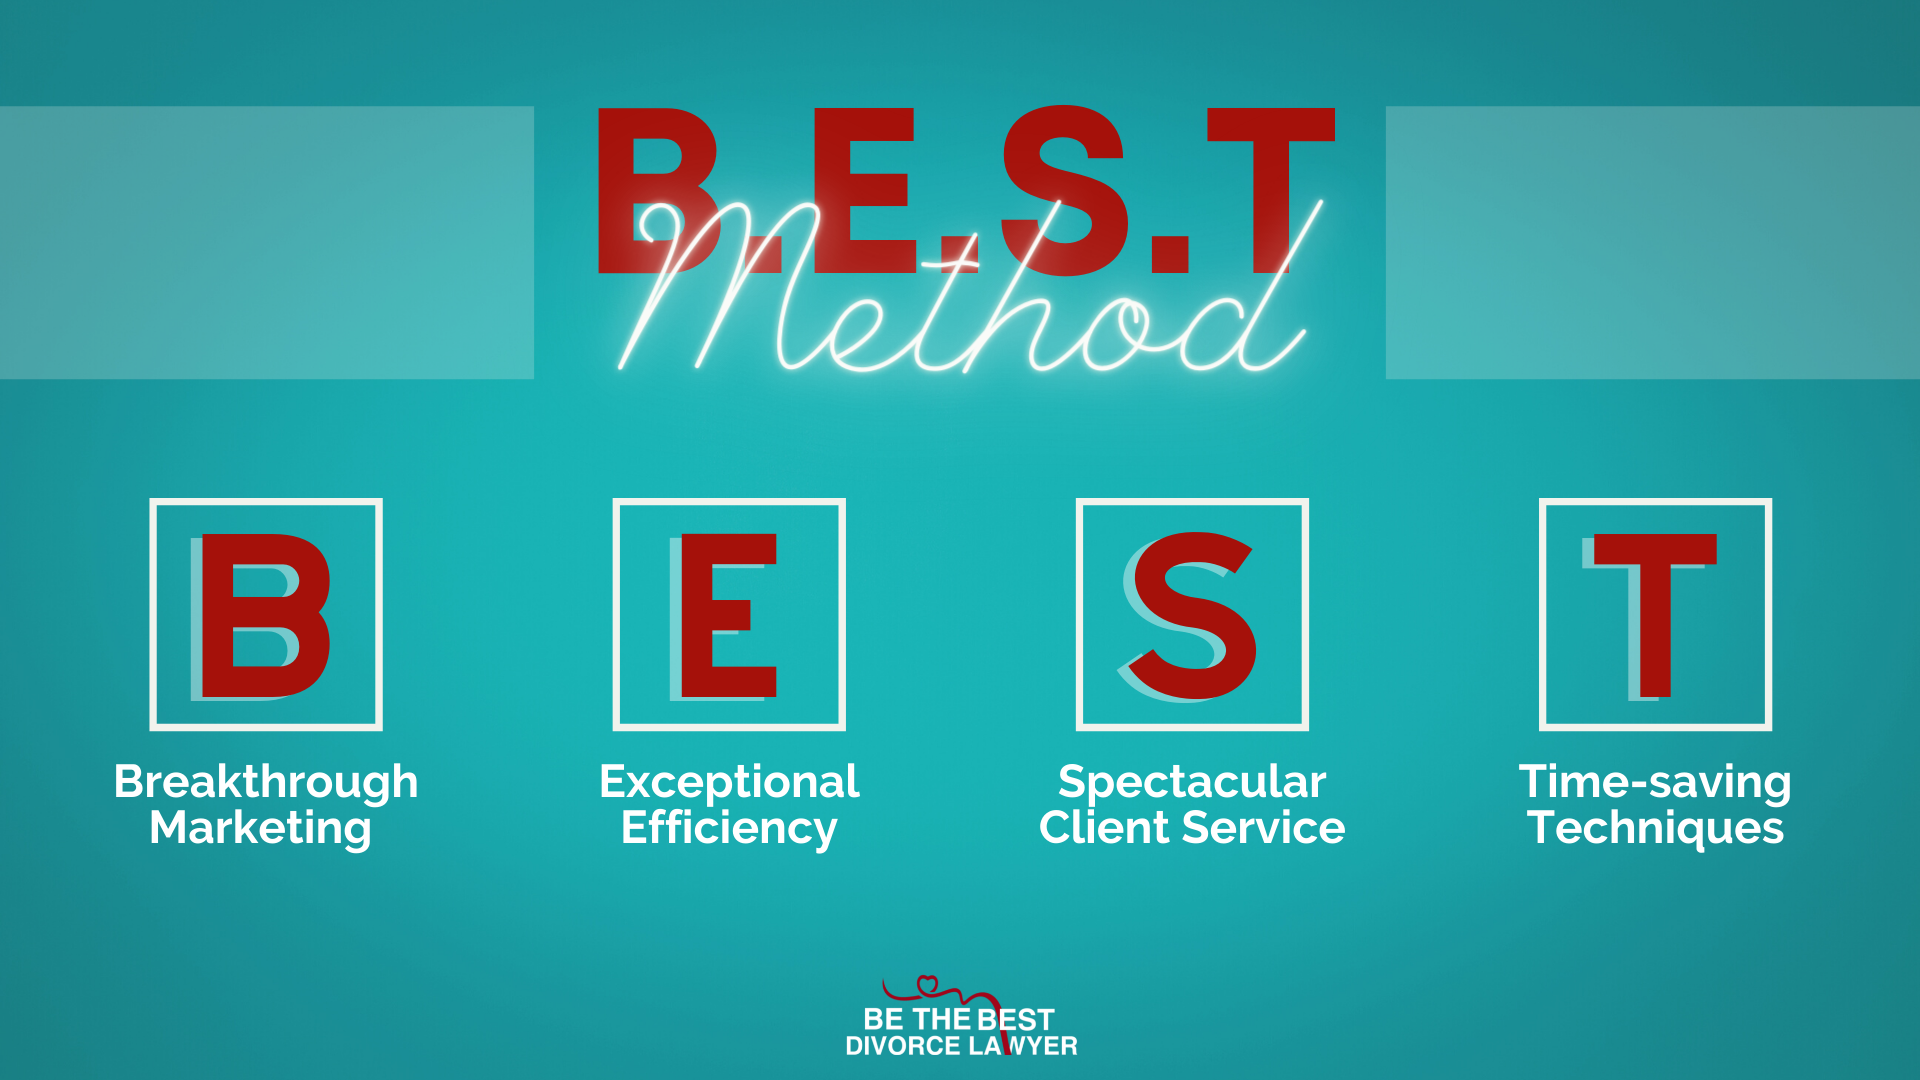 Discover the B.E.S.T. Method for Your Law Practice: